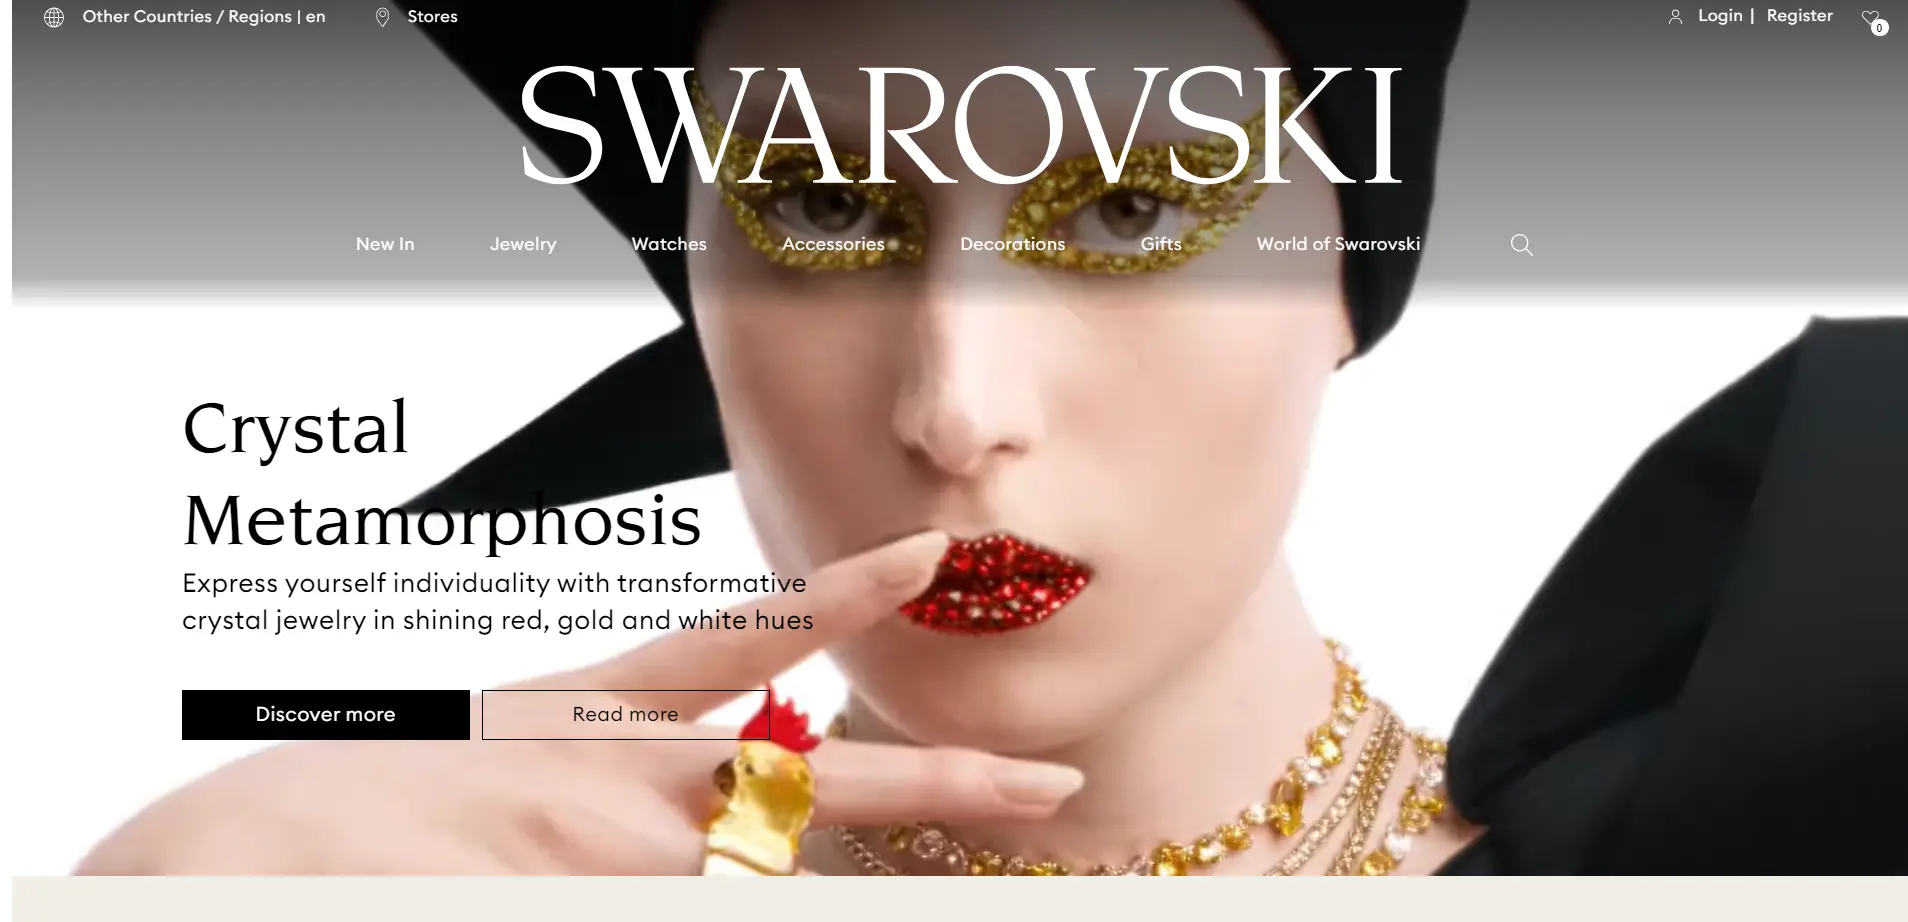 Home page of the Swarovski online store